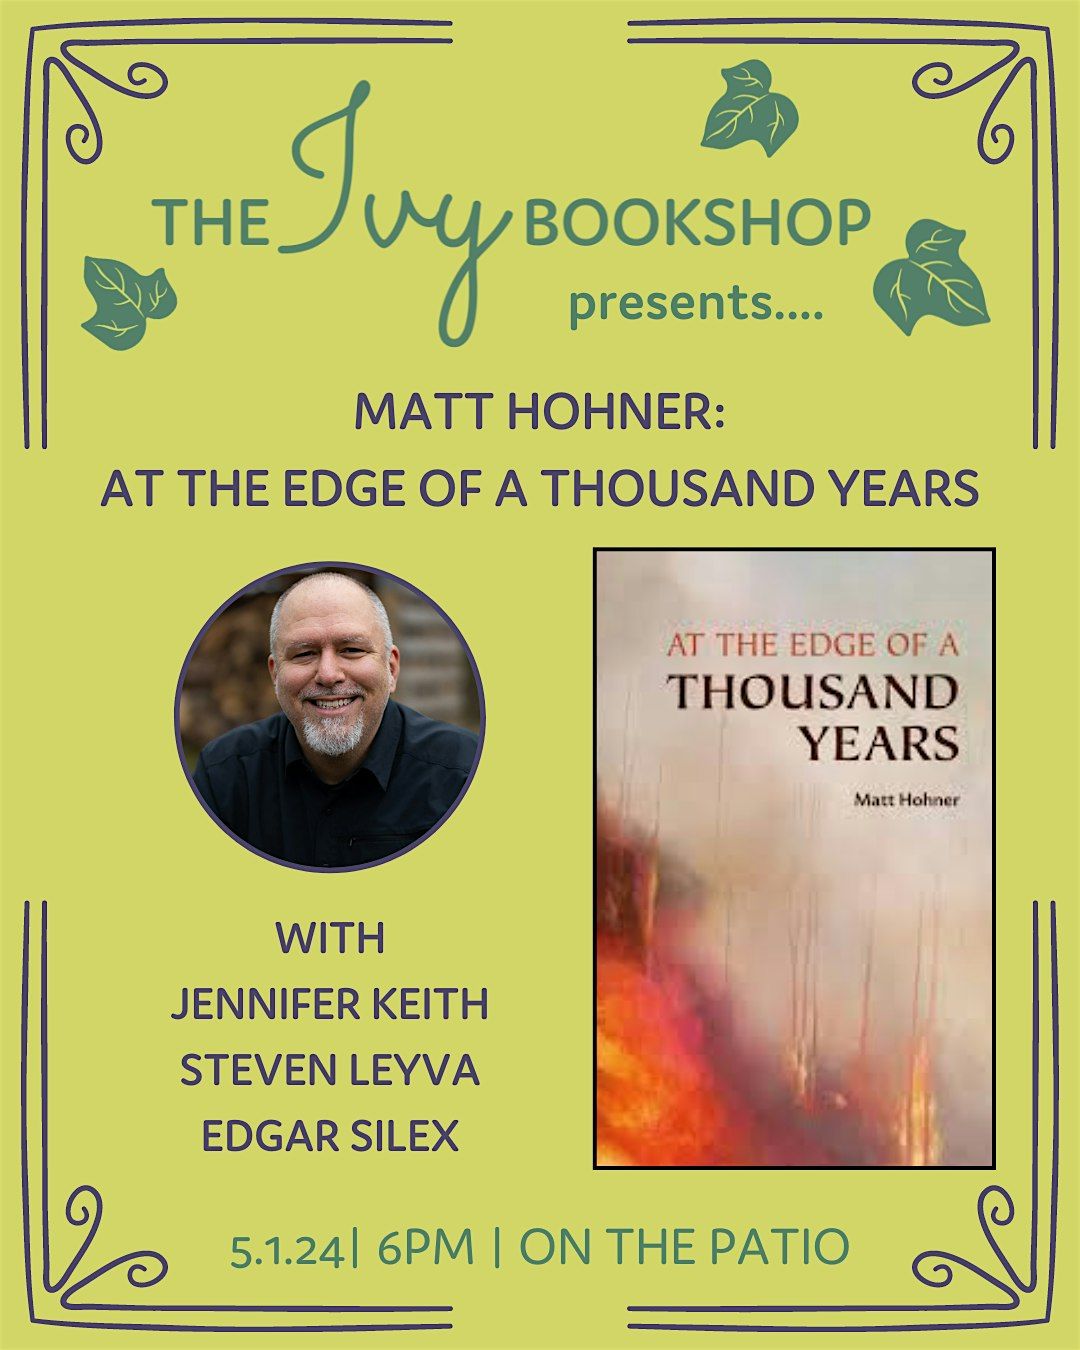 Matt Hohner: At the Edge of a Thousand Years (Poetry Panel)